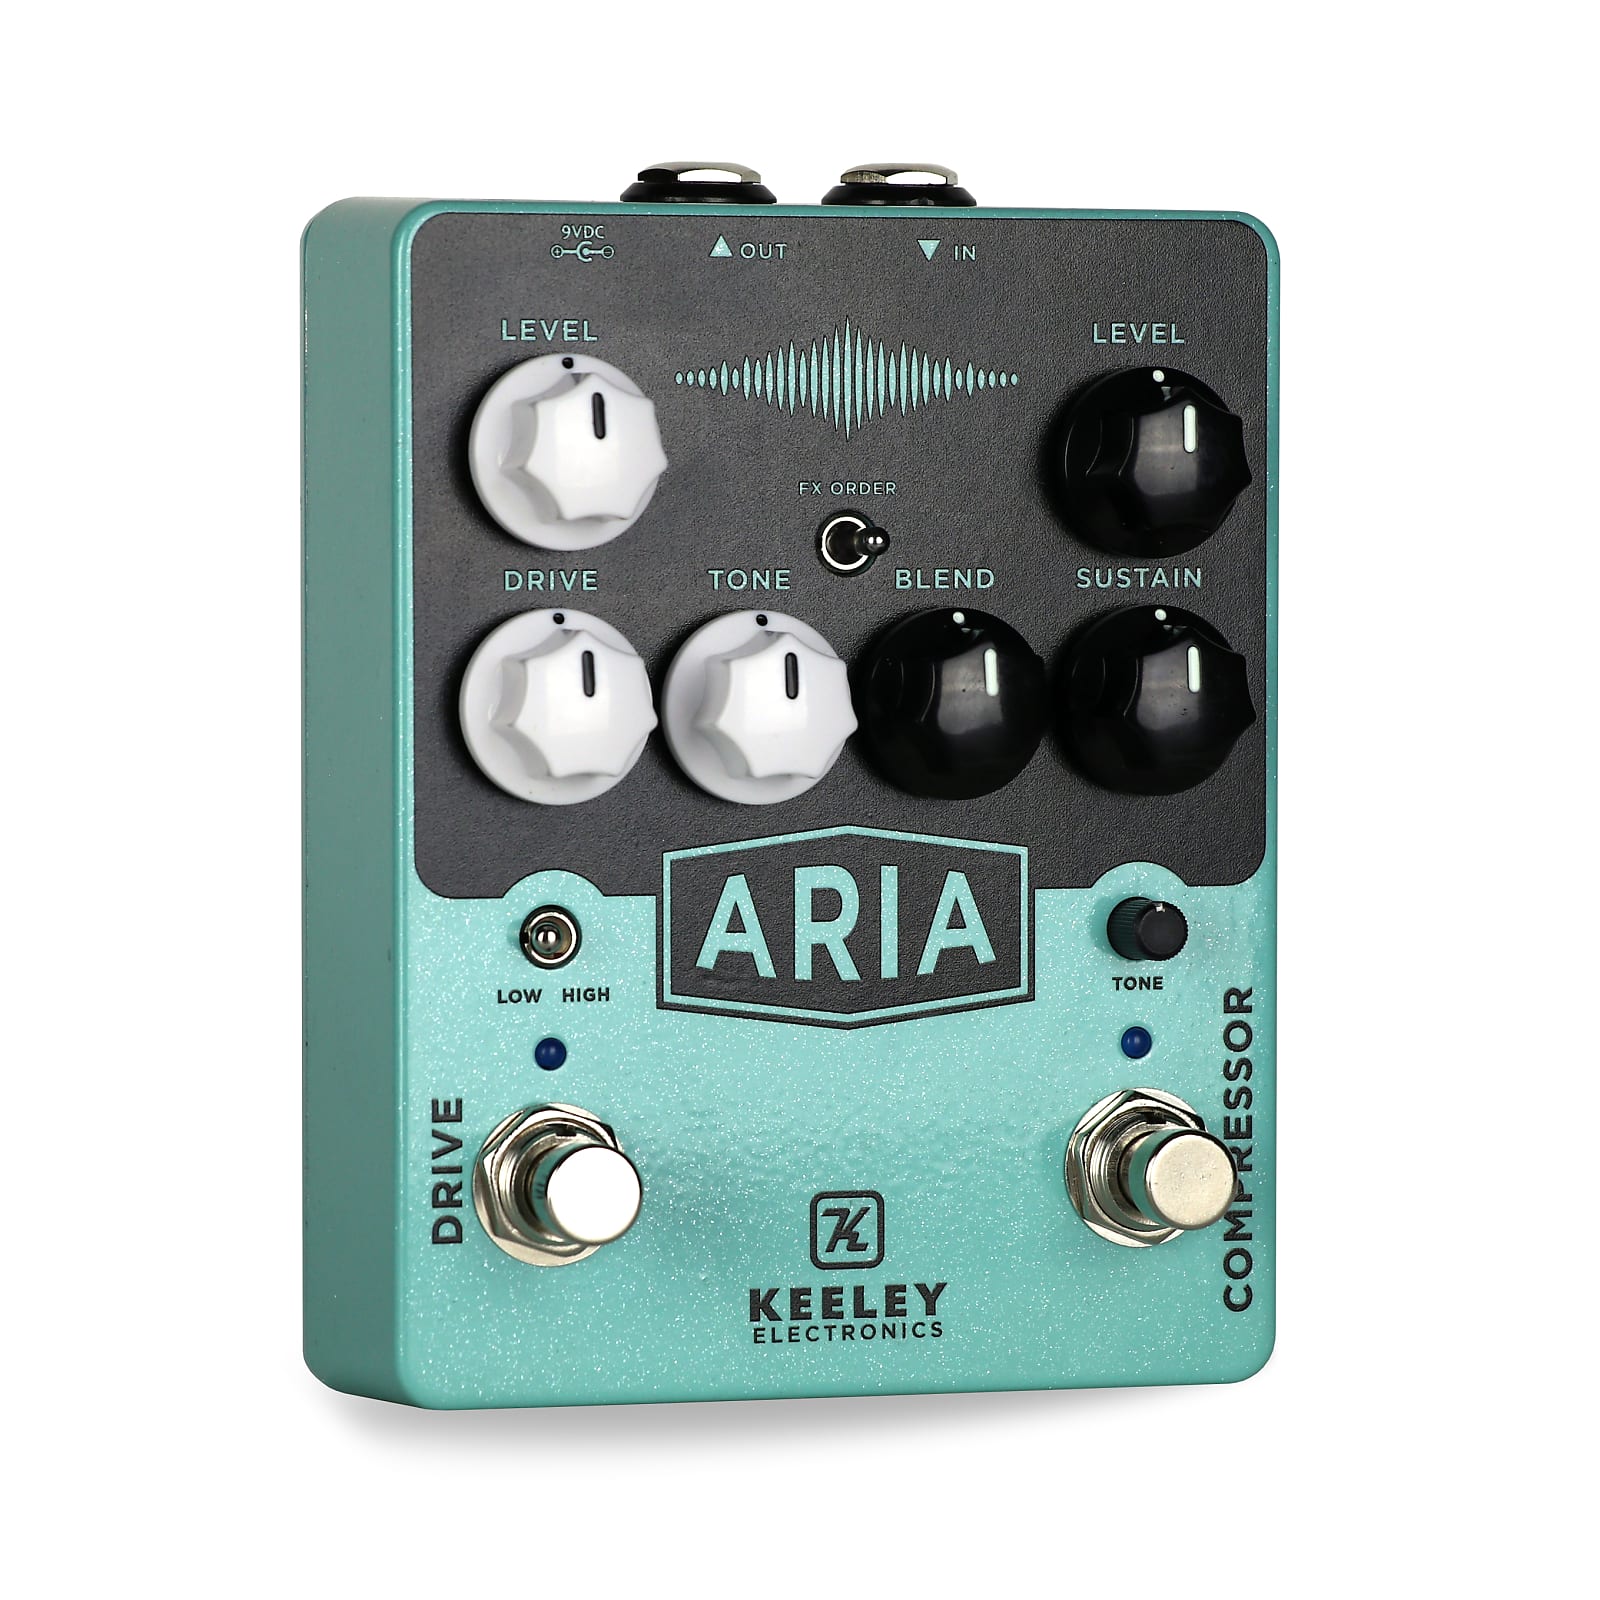 Keeley Aria Compressor / Overdrive Effects Pedal